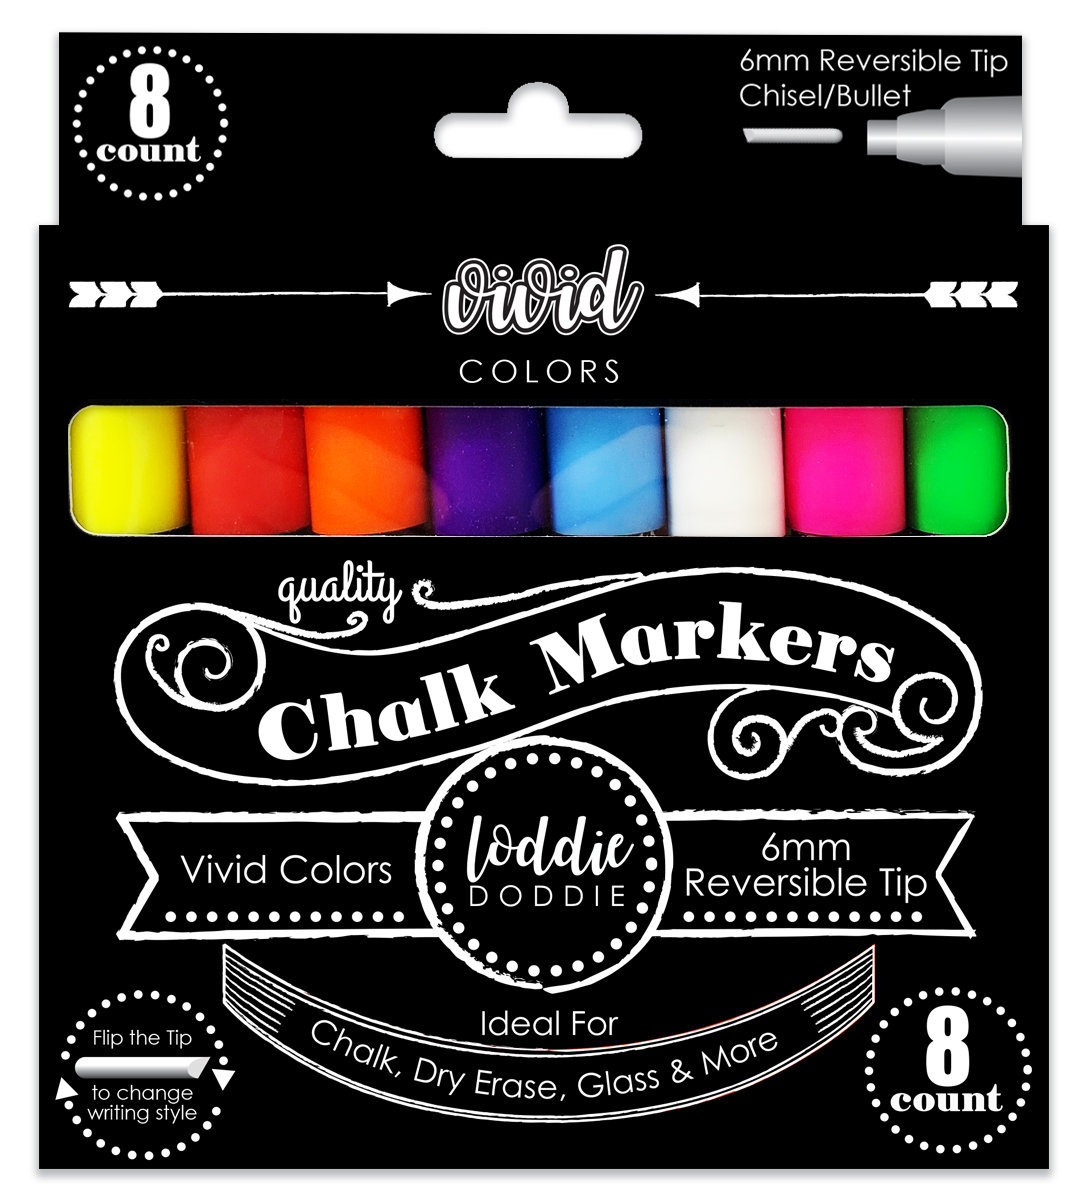 Fabric Chalk for Sewing Tailors Chalk, Tailor Chalk Fabric Markers for  Sewing, Fabric Chalk Sewing Made in Canada Wax Based Tailor's Chalk by  SEWTCO